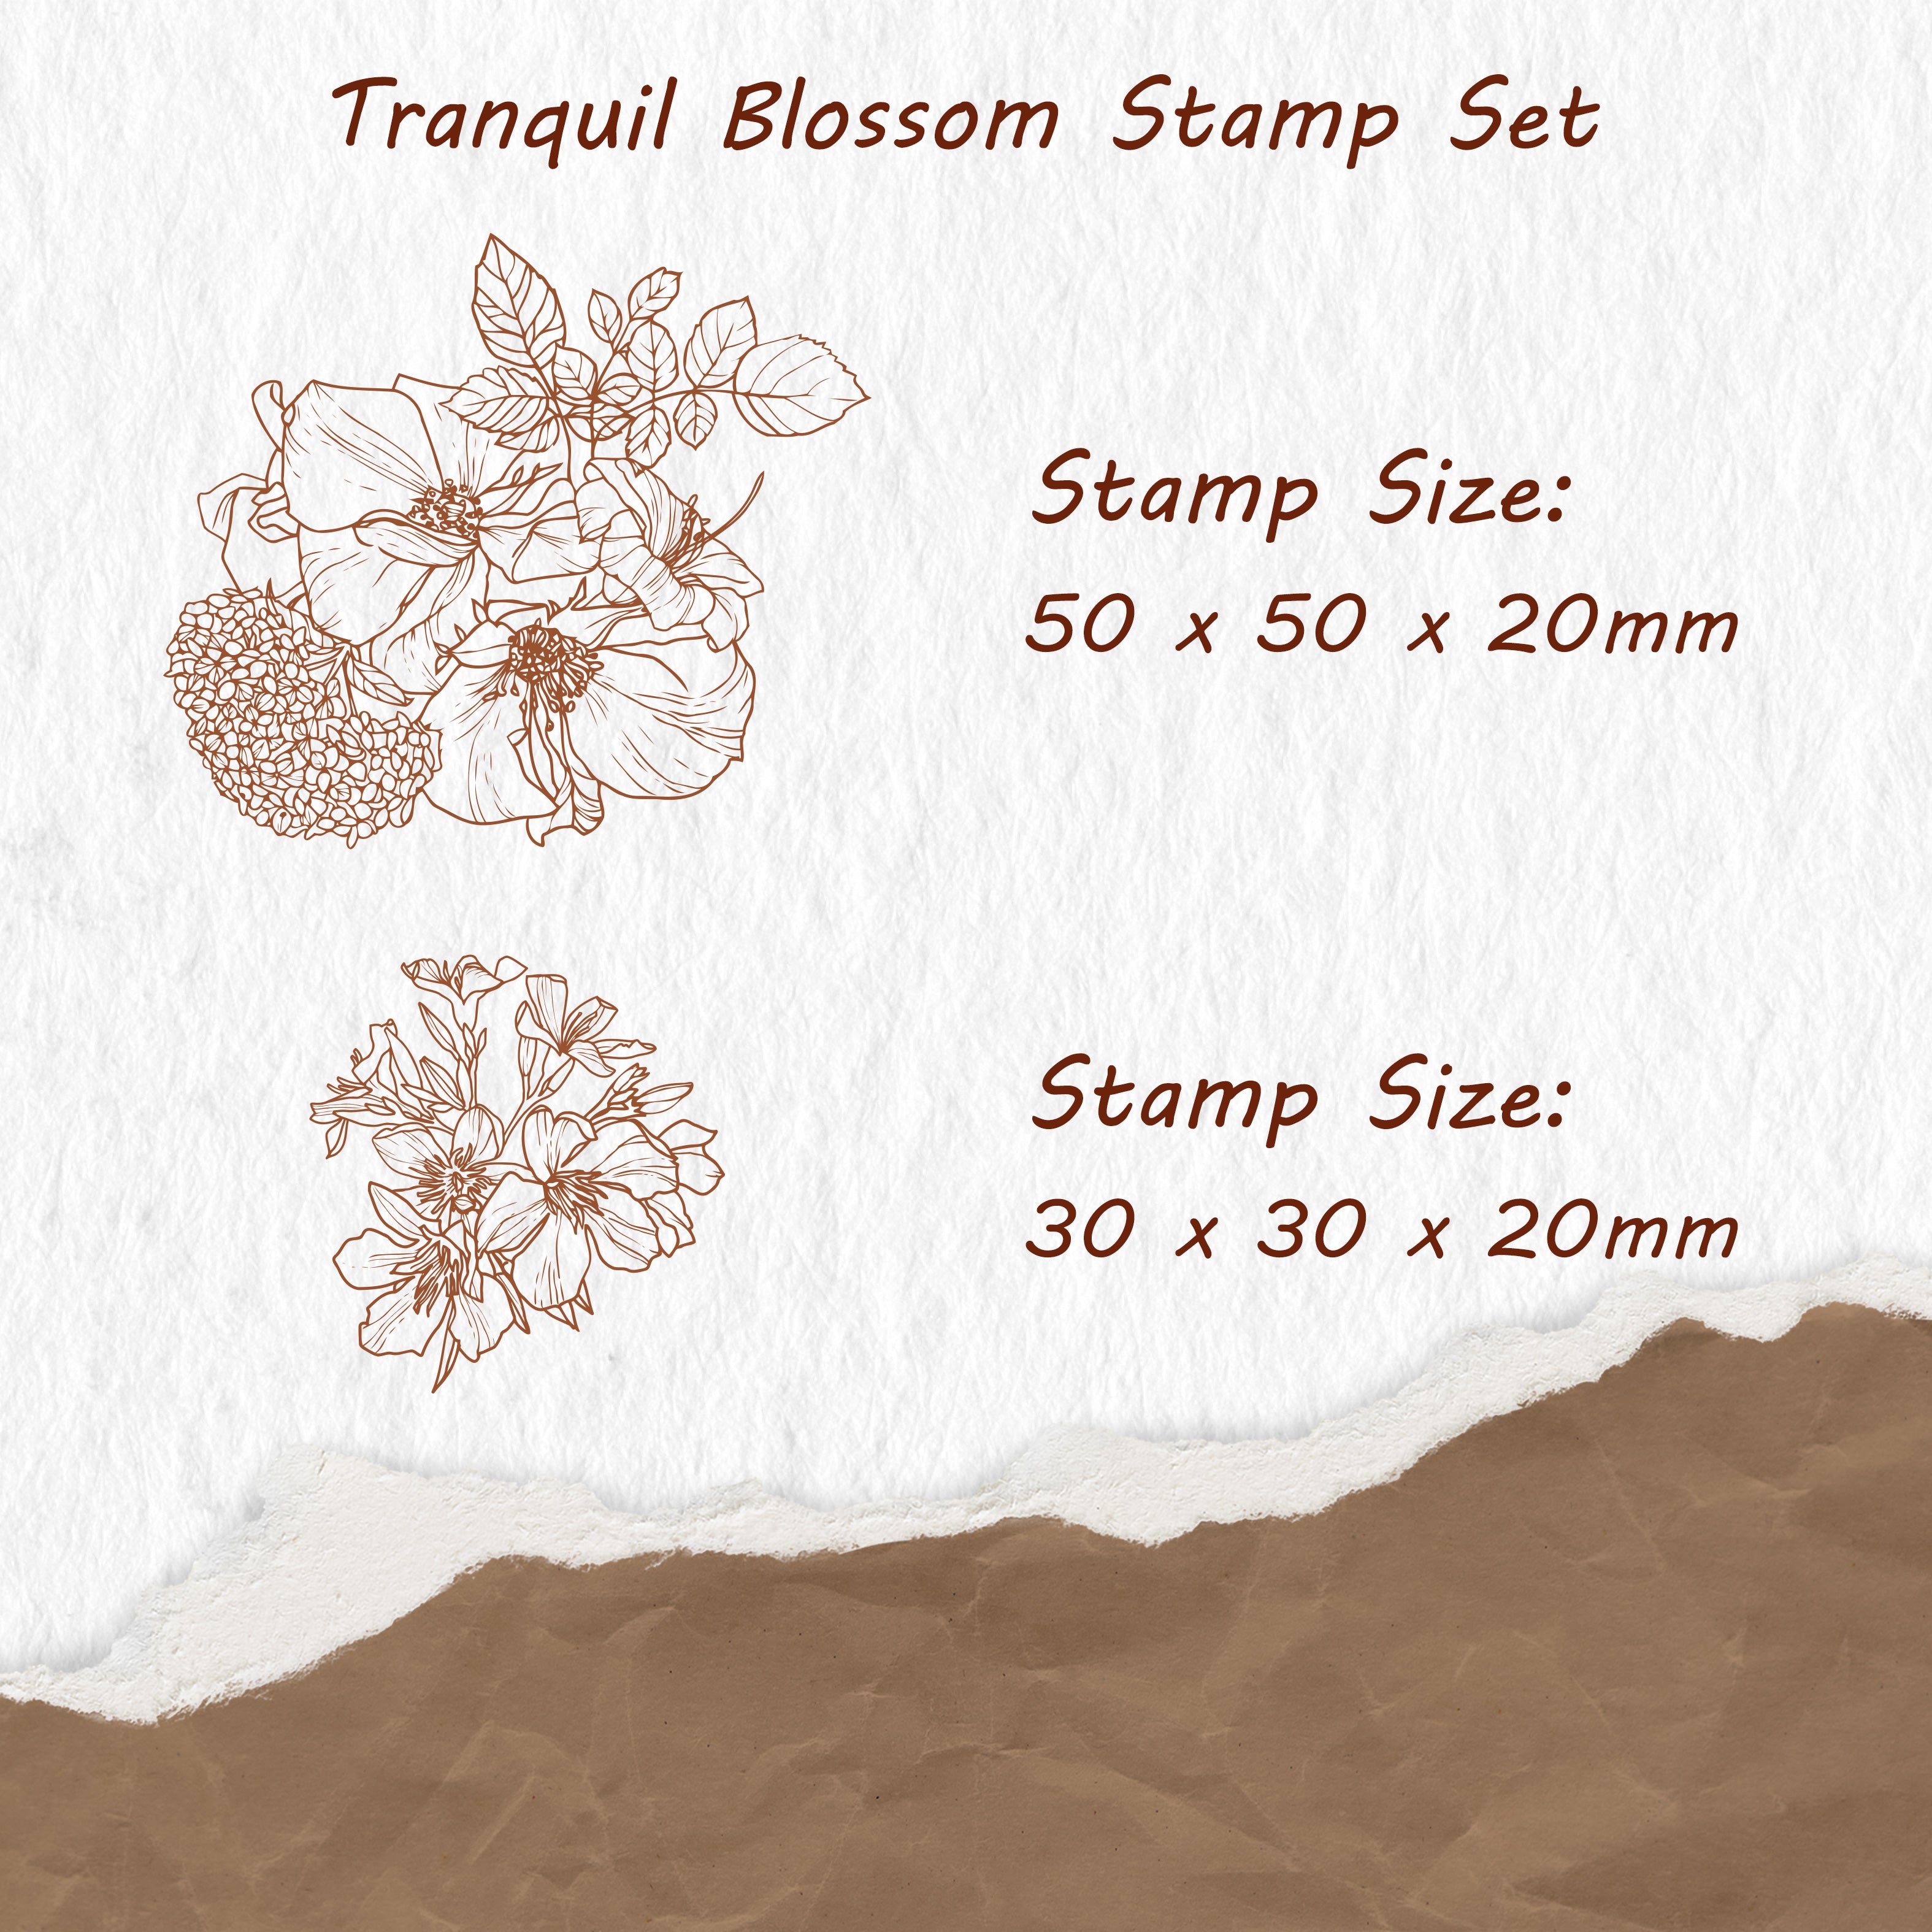 Tranquil Blossom Stamp Set | The Washi Tape Shop. Beautiful Washi and Decorative Tape For Bullet Journals, Gift Wrapping, Planner Decoration and DIY Projects